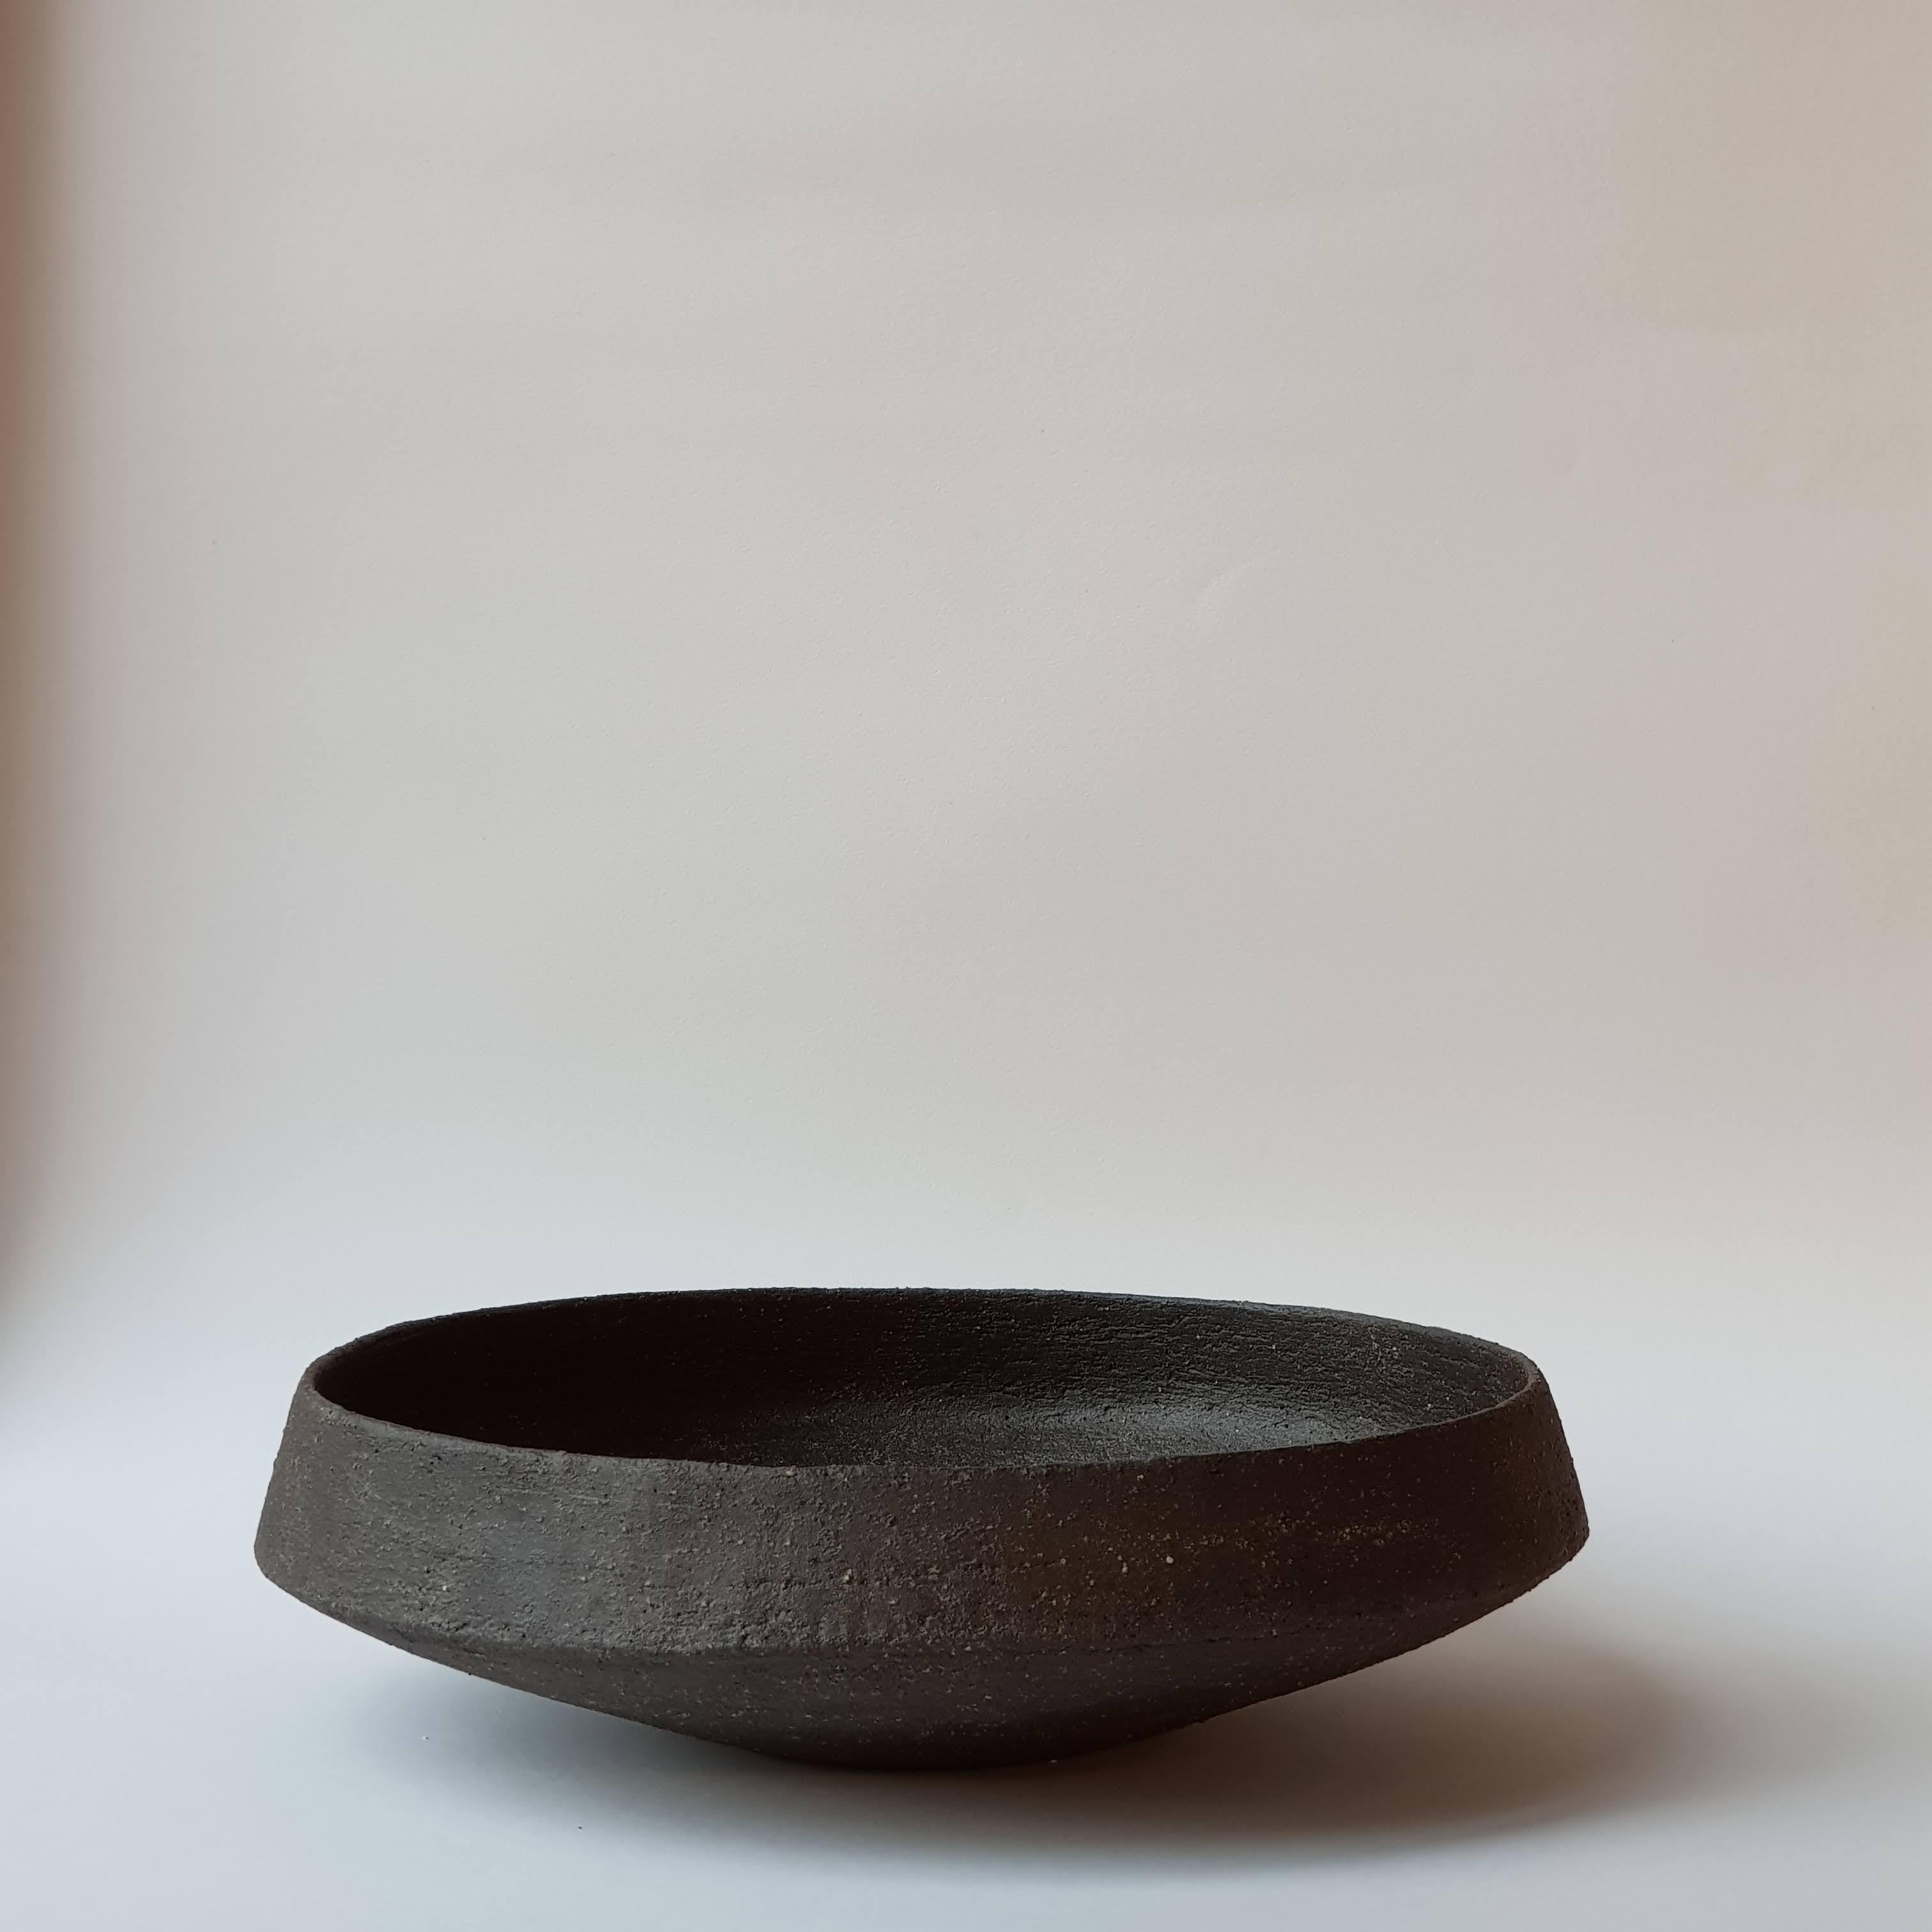 Black Stoneware Pinakio Plate by Elena Vasilantonaki
Unique
Dimensions: ⌀ 34 x H 10 cm (Dimensions may vary)
Materials: Stoneware
Available finishes: With\without handles - Black, White, Grey , Brown, Red, White Patina

Growing up in Greece I was